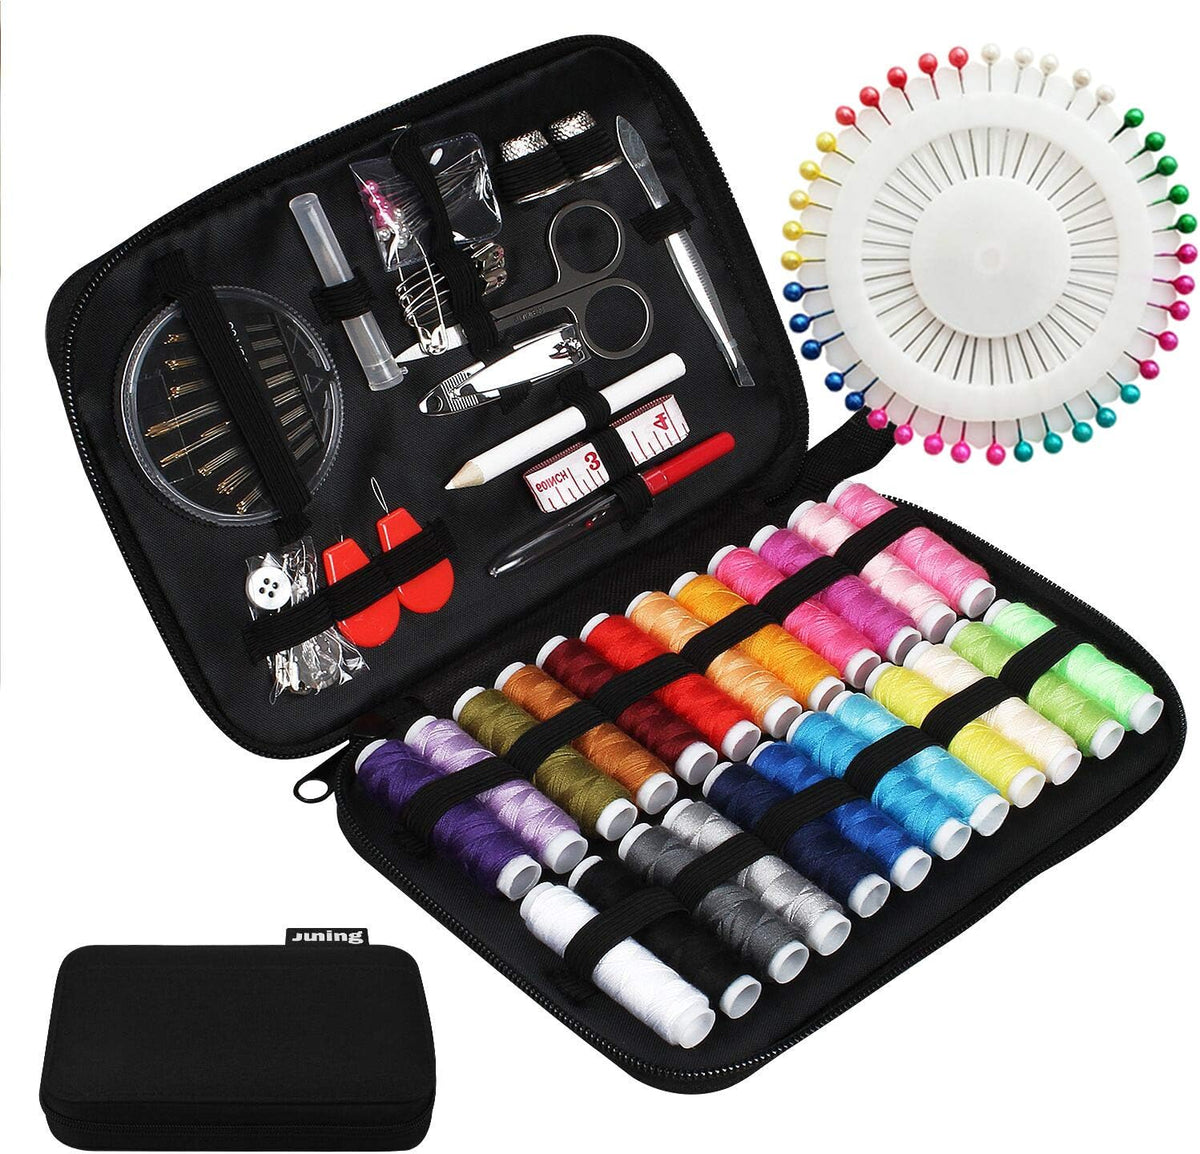 Sewing Kit with Case, 130 pcs Sewing Supplies for Home Travel and Emergency, Kids Machine, Contains 24 Spools of Thread of 100m, Mending and Sewing Needles, Scissors, Thimble, Tape Measure etc